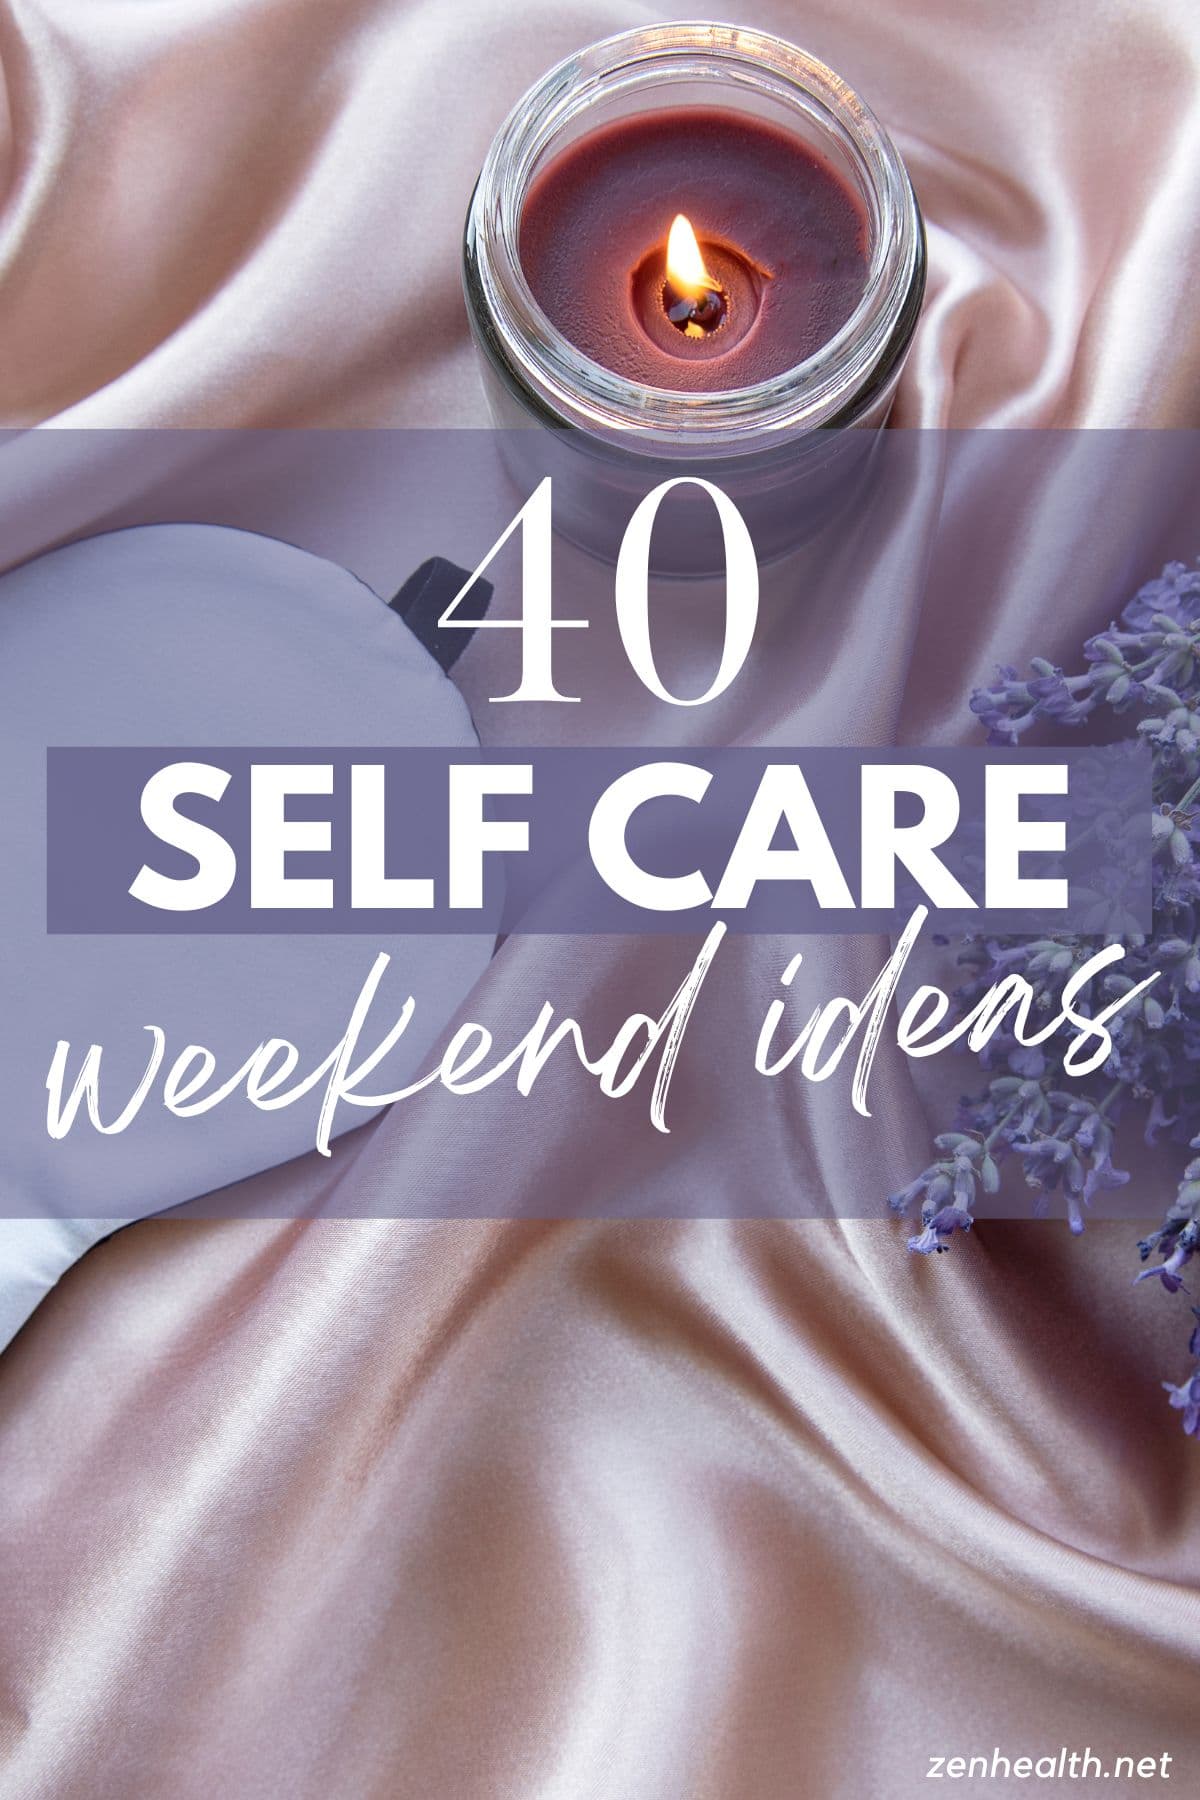 40 self care weekend ideas text overlay on a photo of a candle, bunch of lavender and a sleeping mask on light pink satin fabric